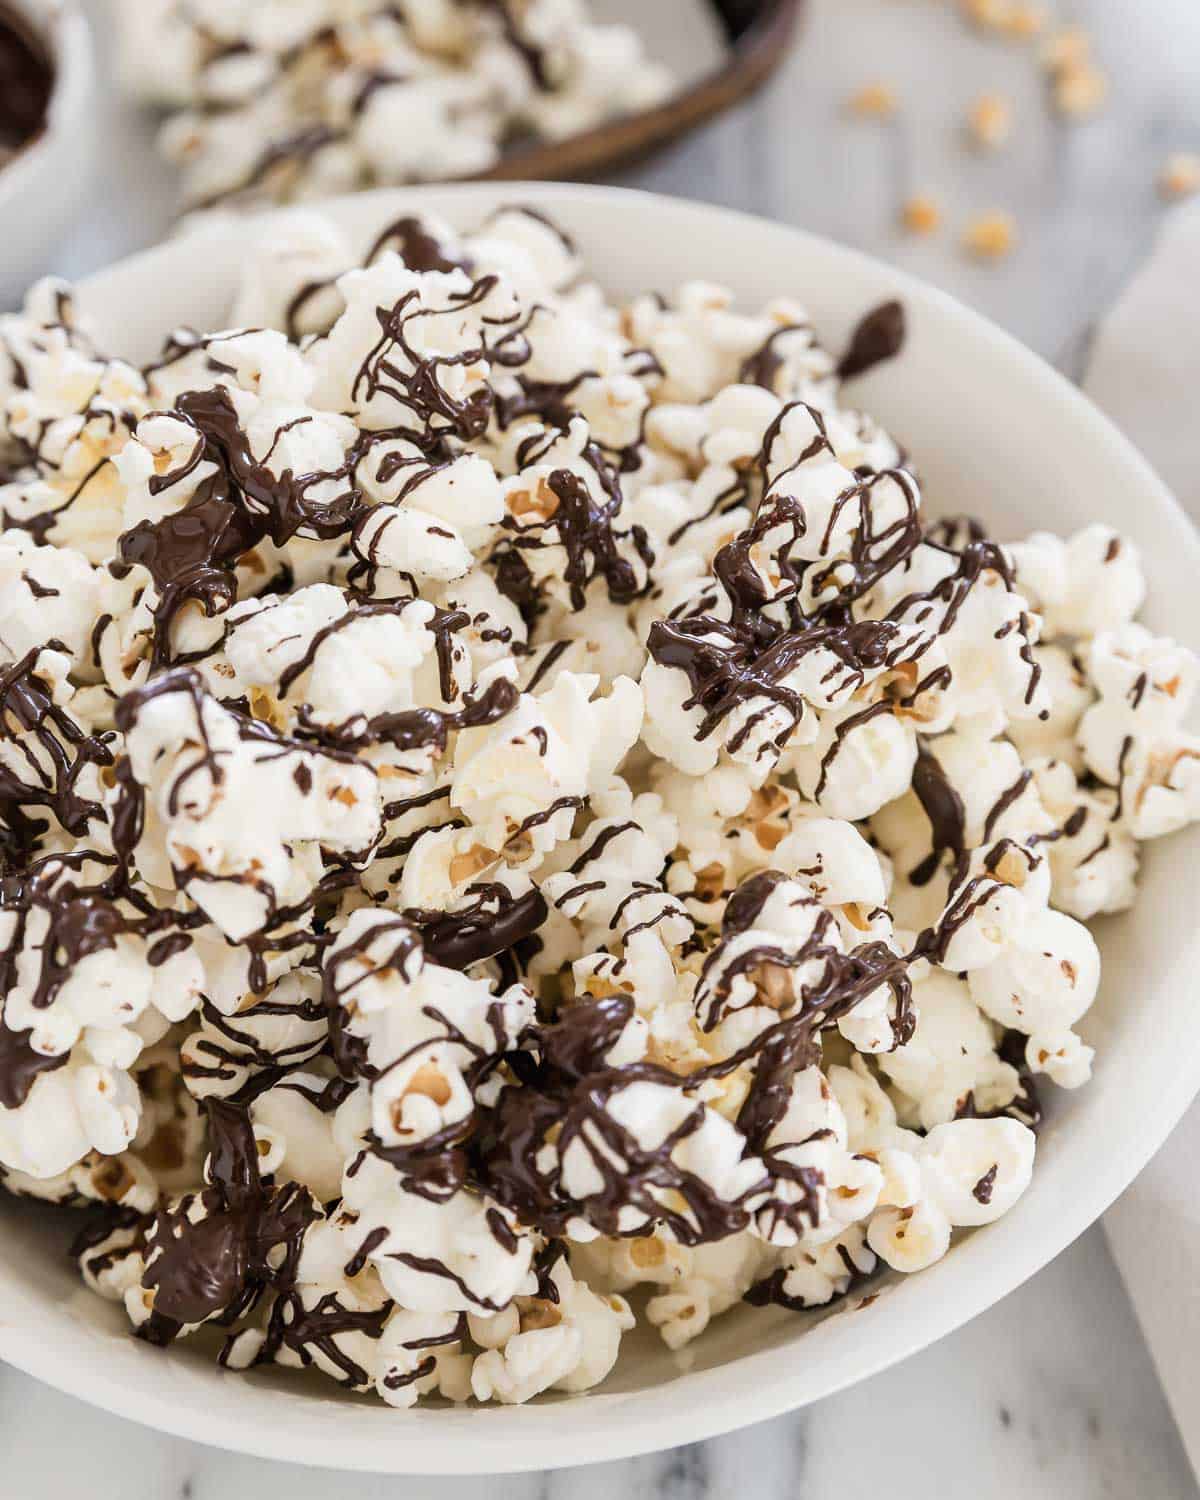 Chocolate covered popcorn in a white bowl.